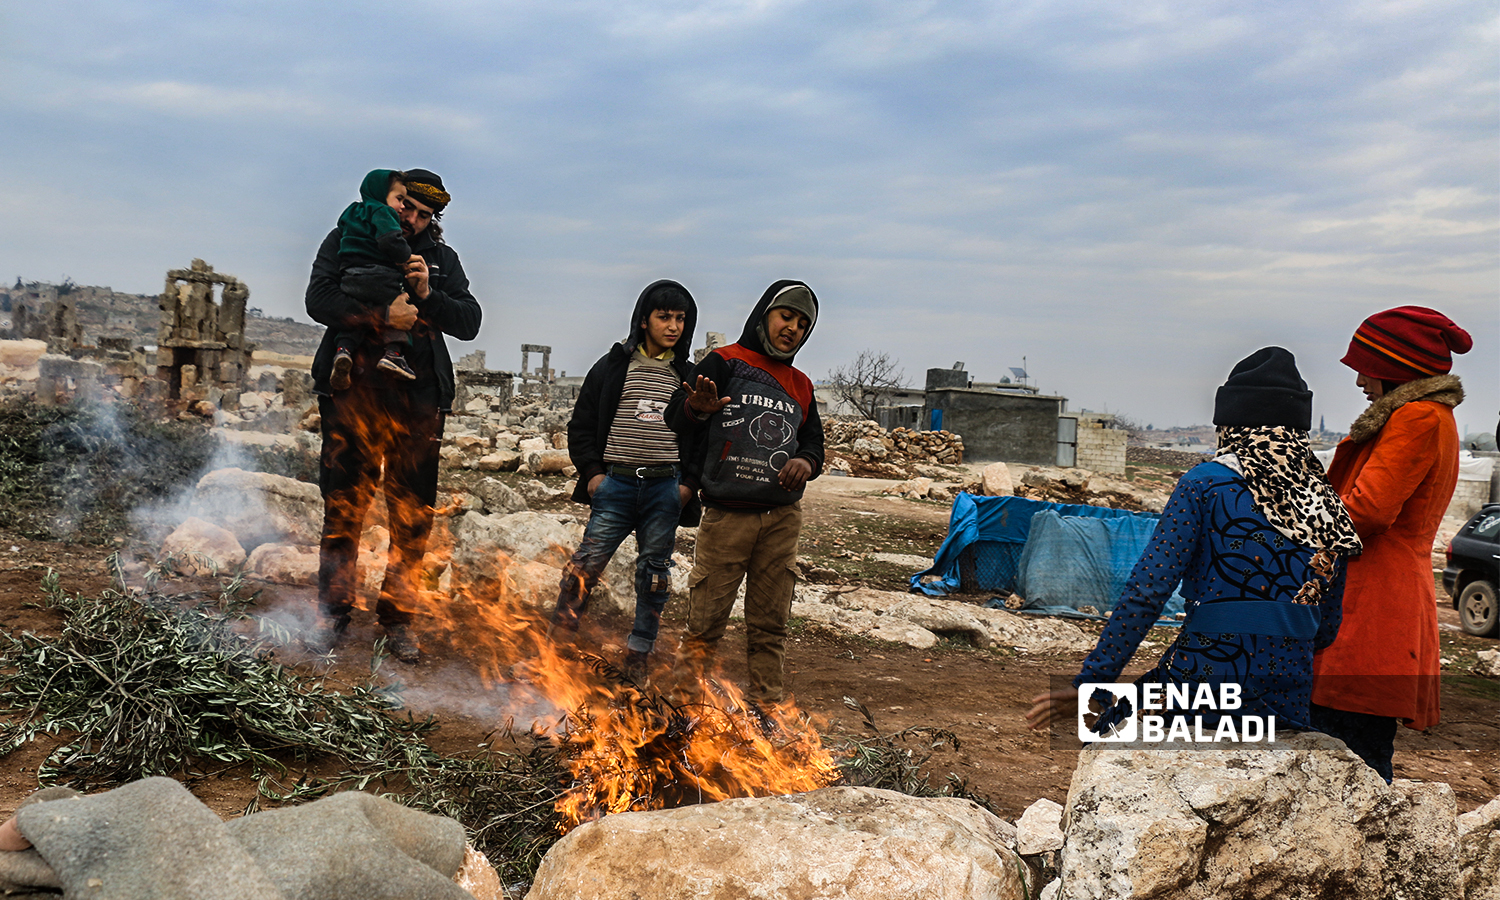 Displaced Syrians starting a fire for heating in the ancient Sarjableh area in the northern countryside of Idlib governorate - 22 January 2022 (Enab Baladi / Iyad Abdul Jawad)
